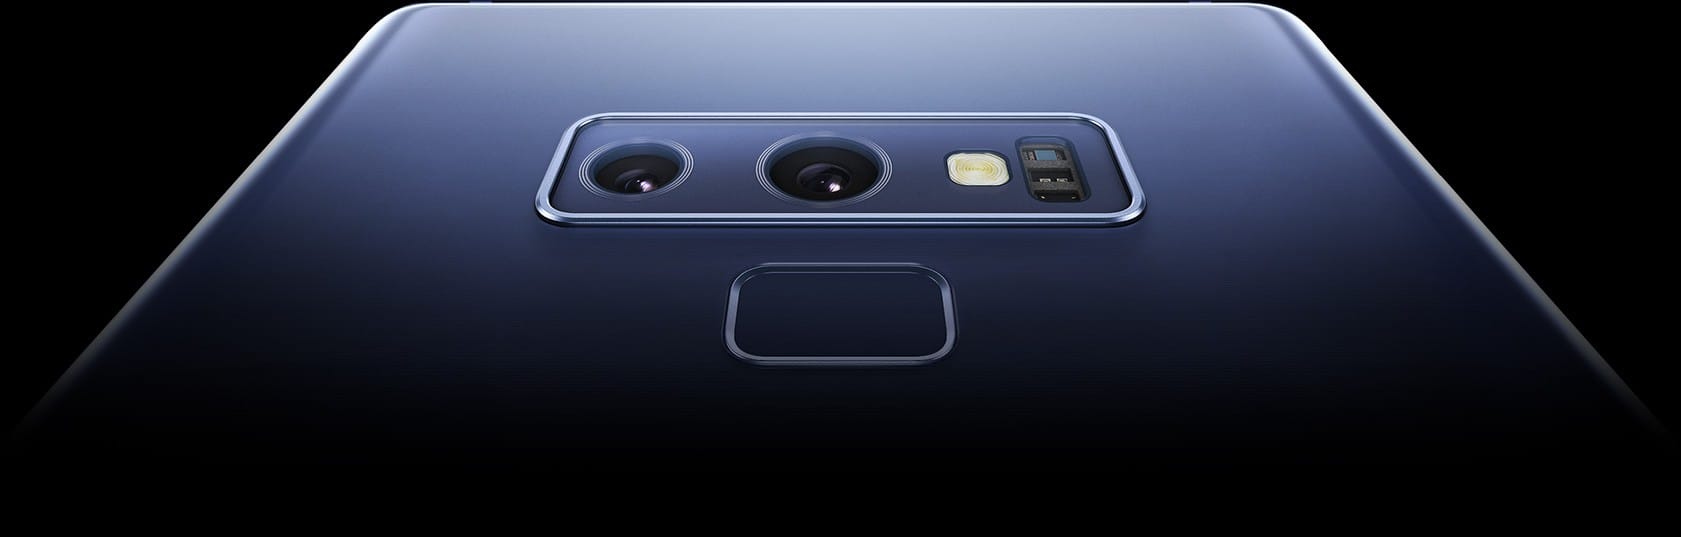 An extreme closeup of Galaxy Note9’s dual lens rear camera and fingerprint scanner